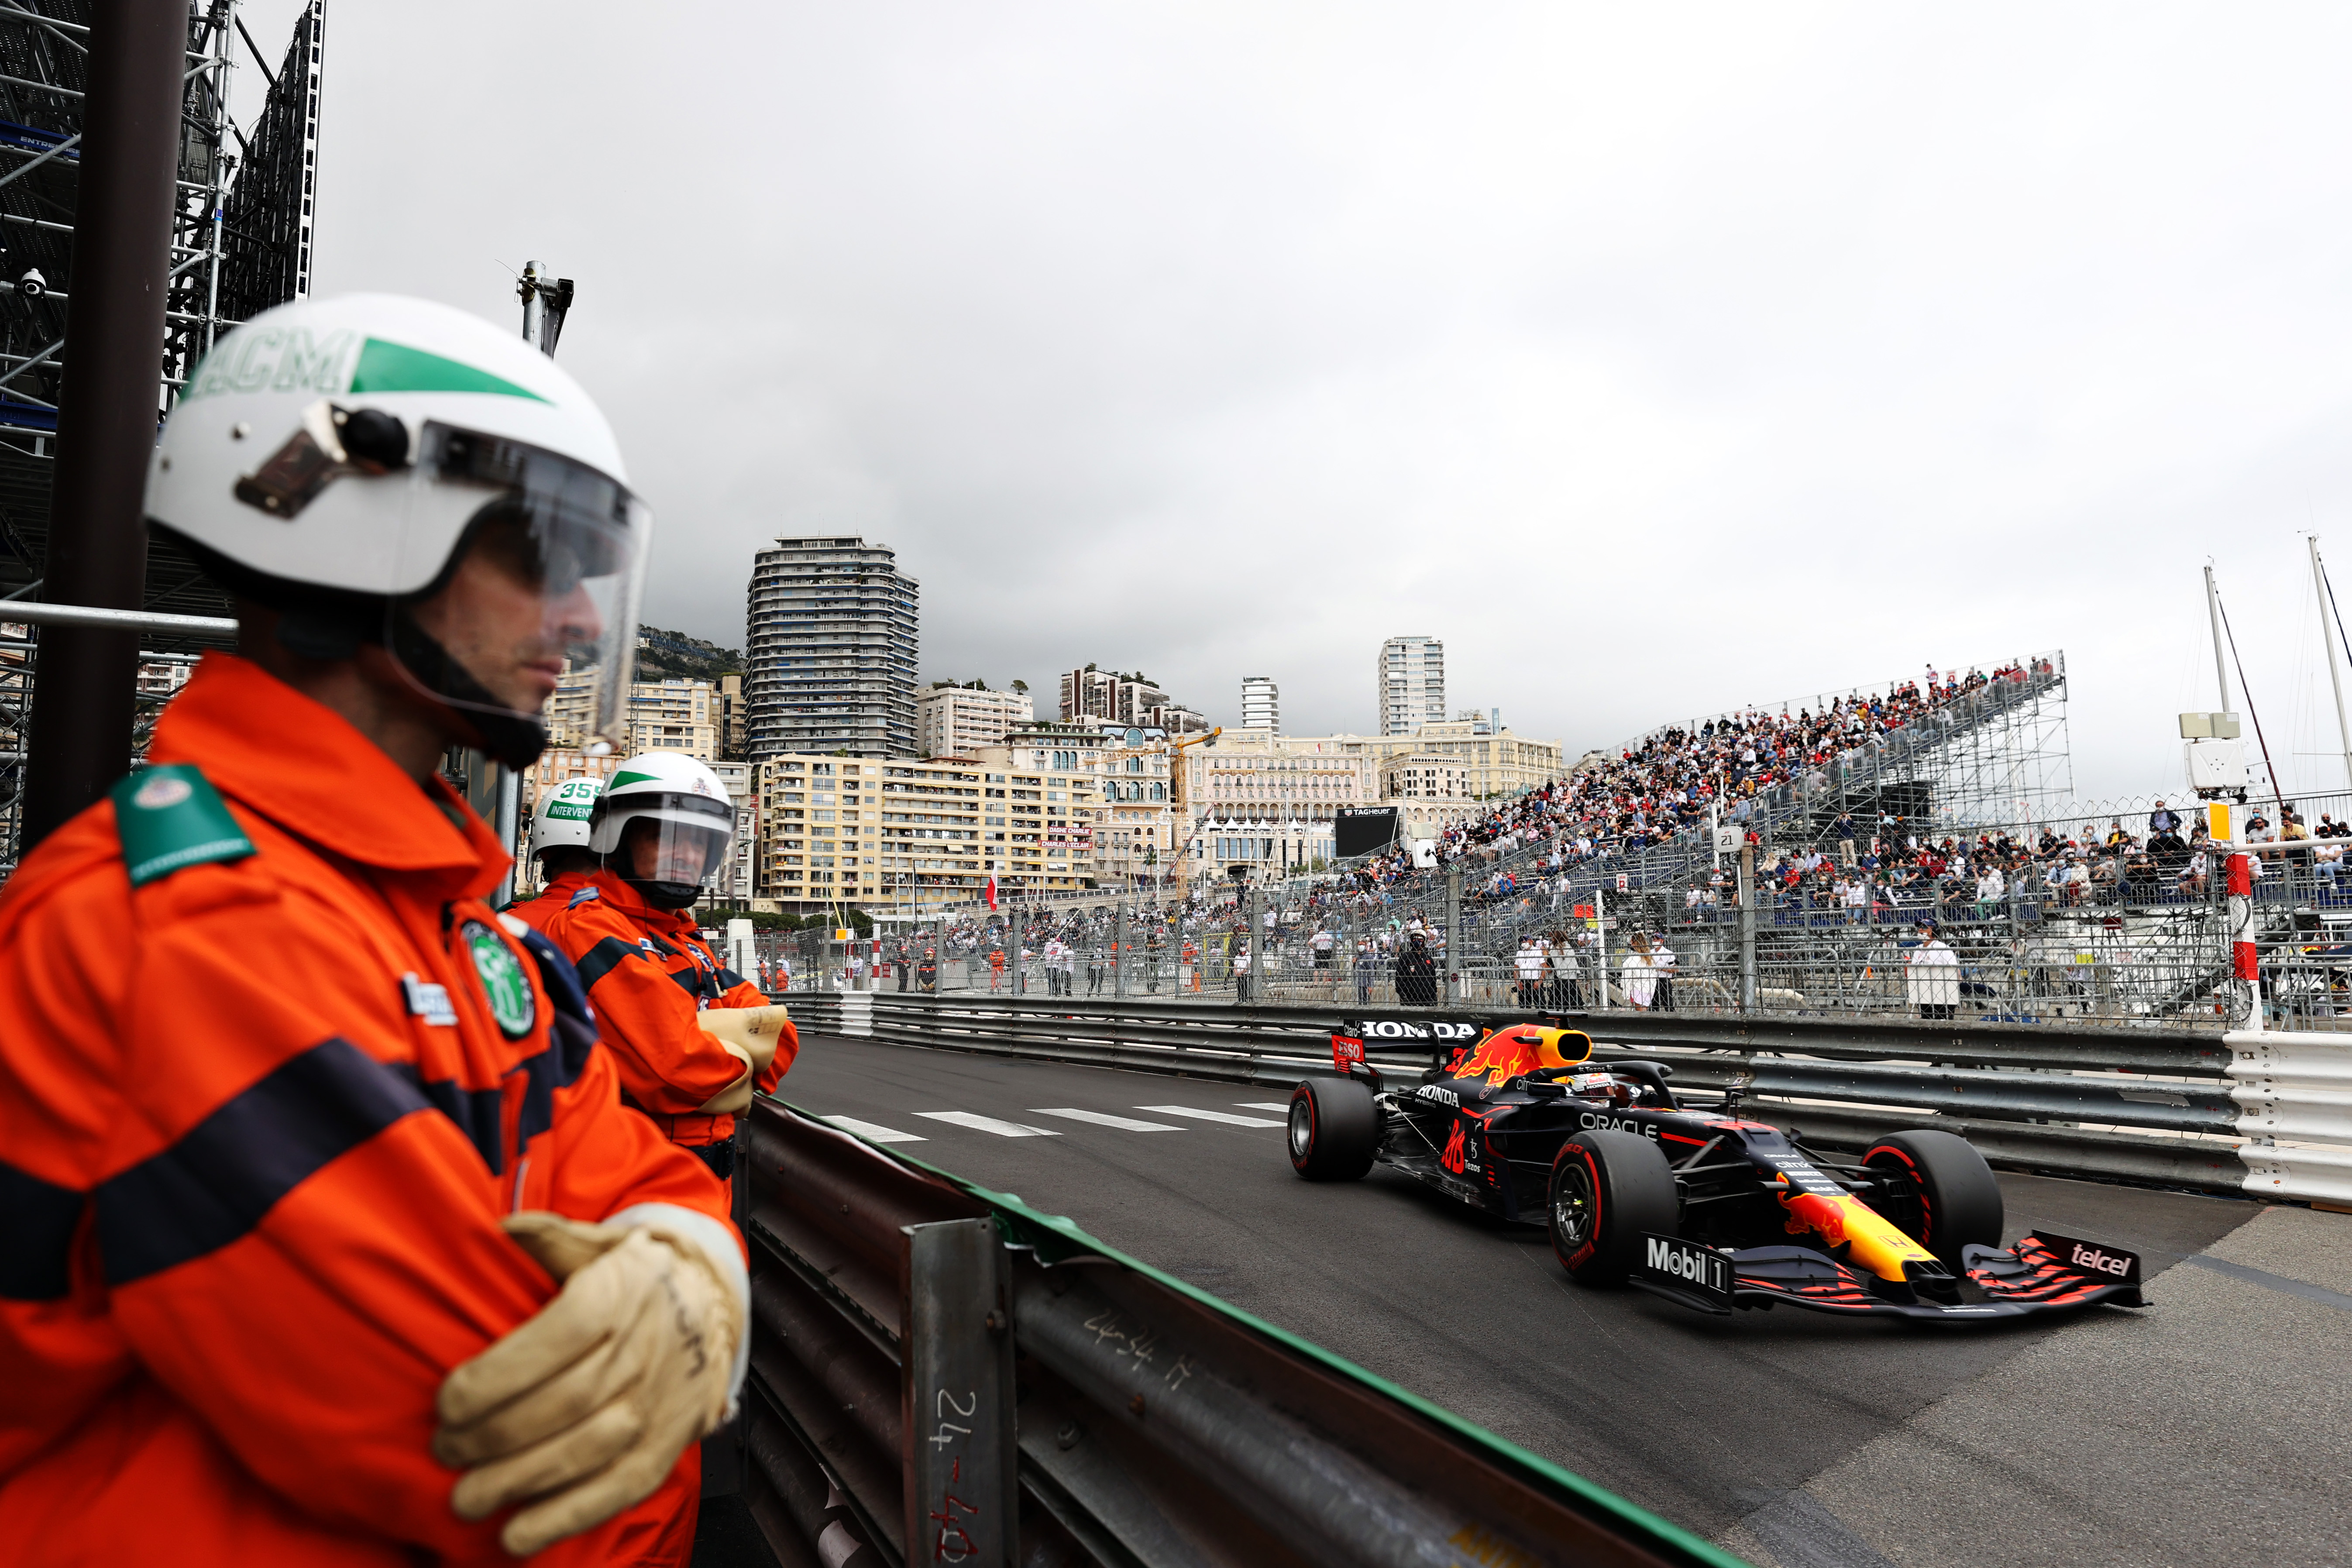 Monaco Grand Prix 2021 Streaming, start time, TV how to watch Formula 1 (Sun., May 23)